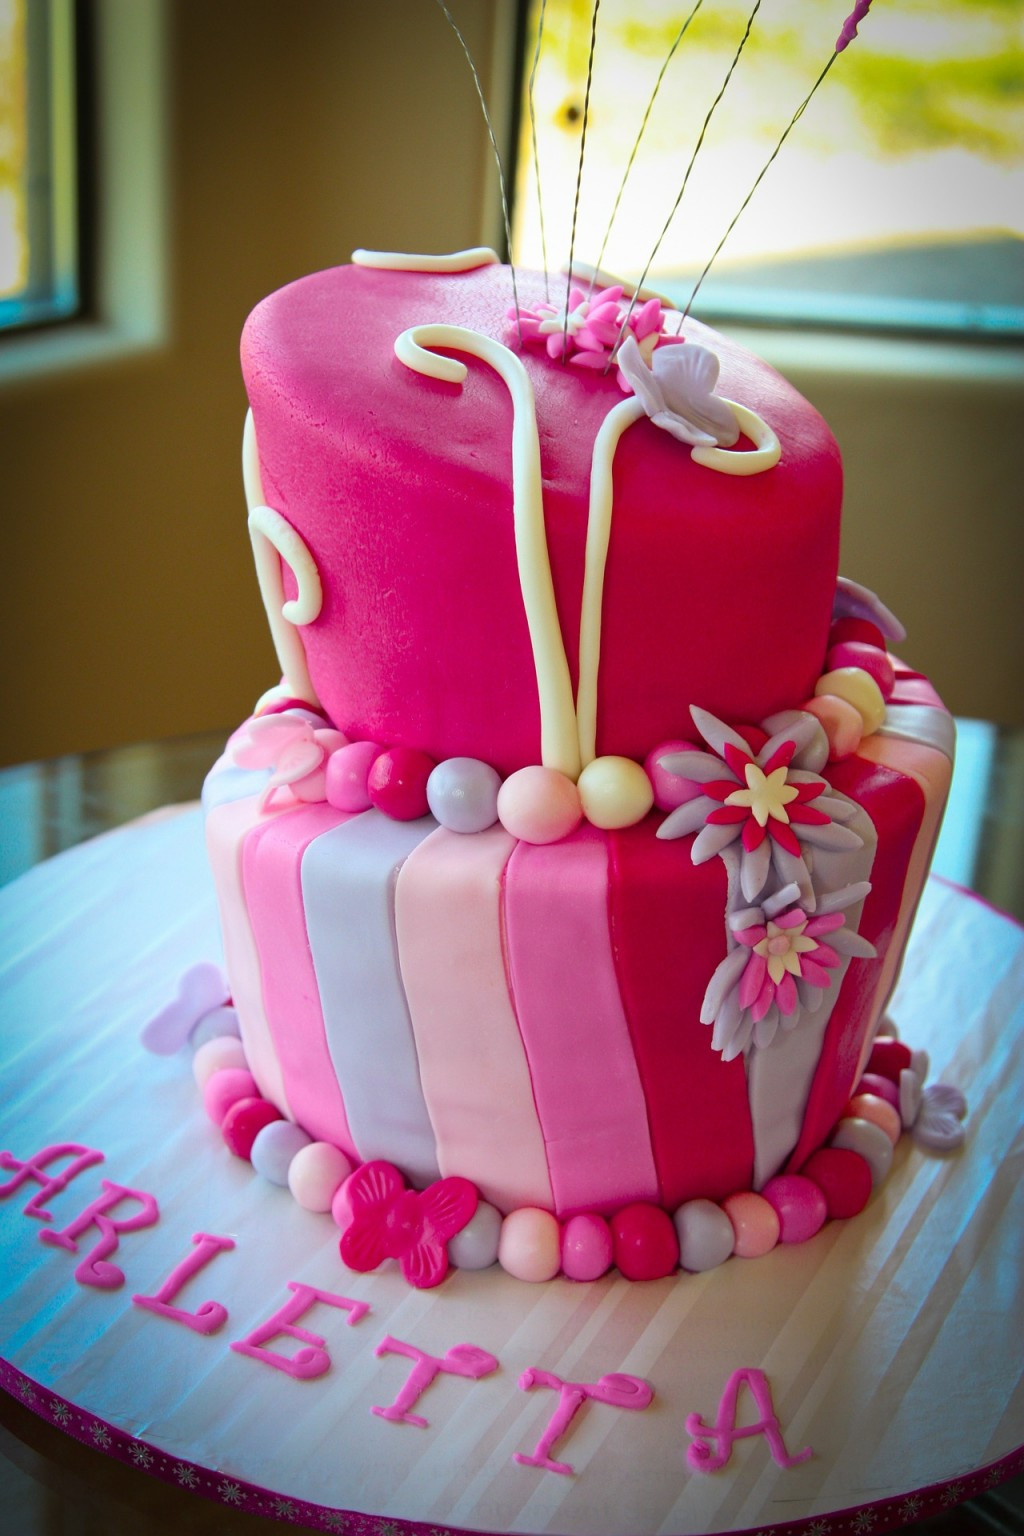 Beautiful Birthday Cakes Images
 50 Beautiful Birthday Cake and Ideas for Kids and